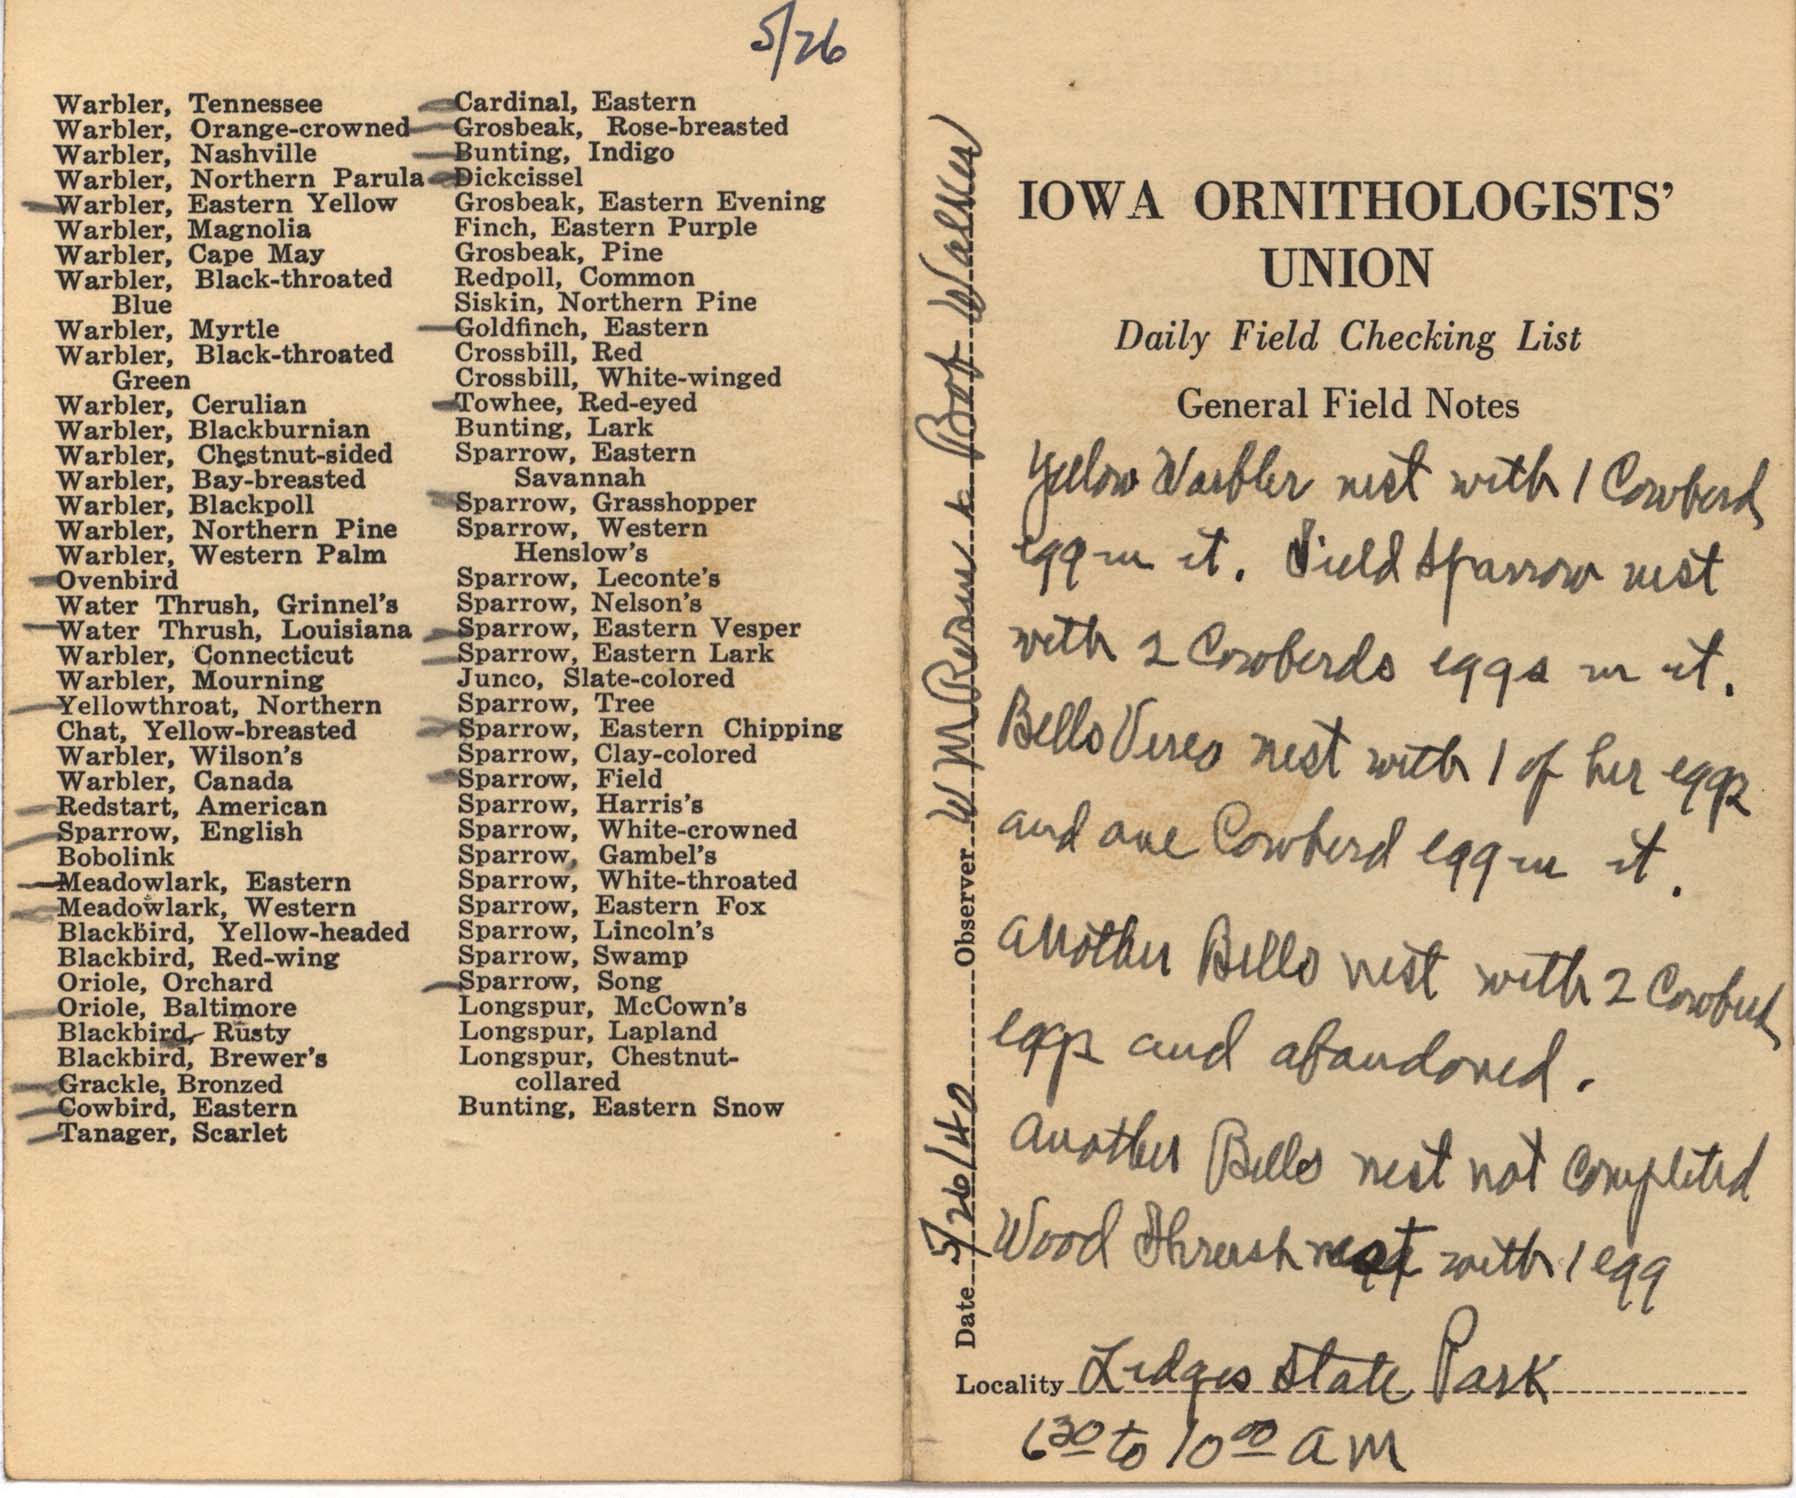 Daily field checking list by Walter Rosene, May 26, 1940